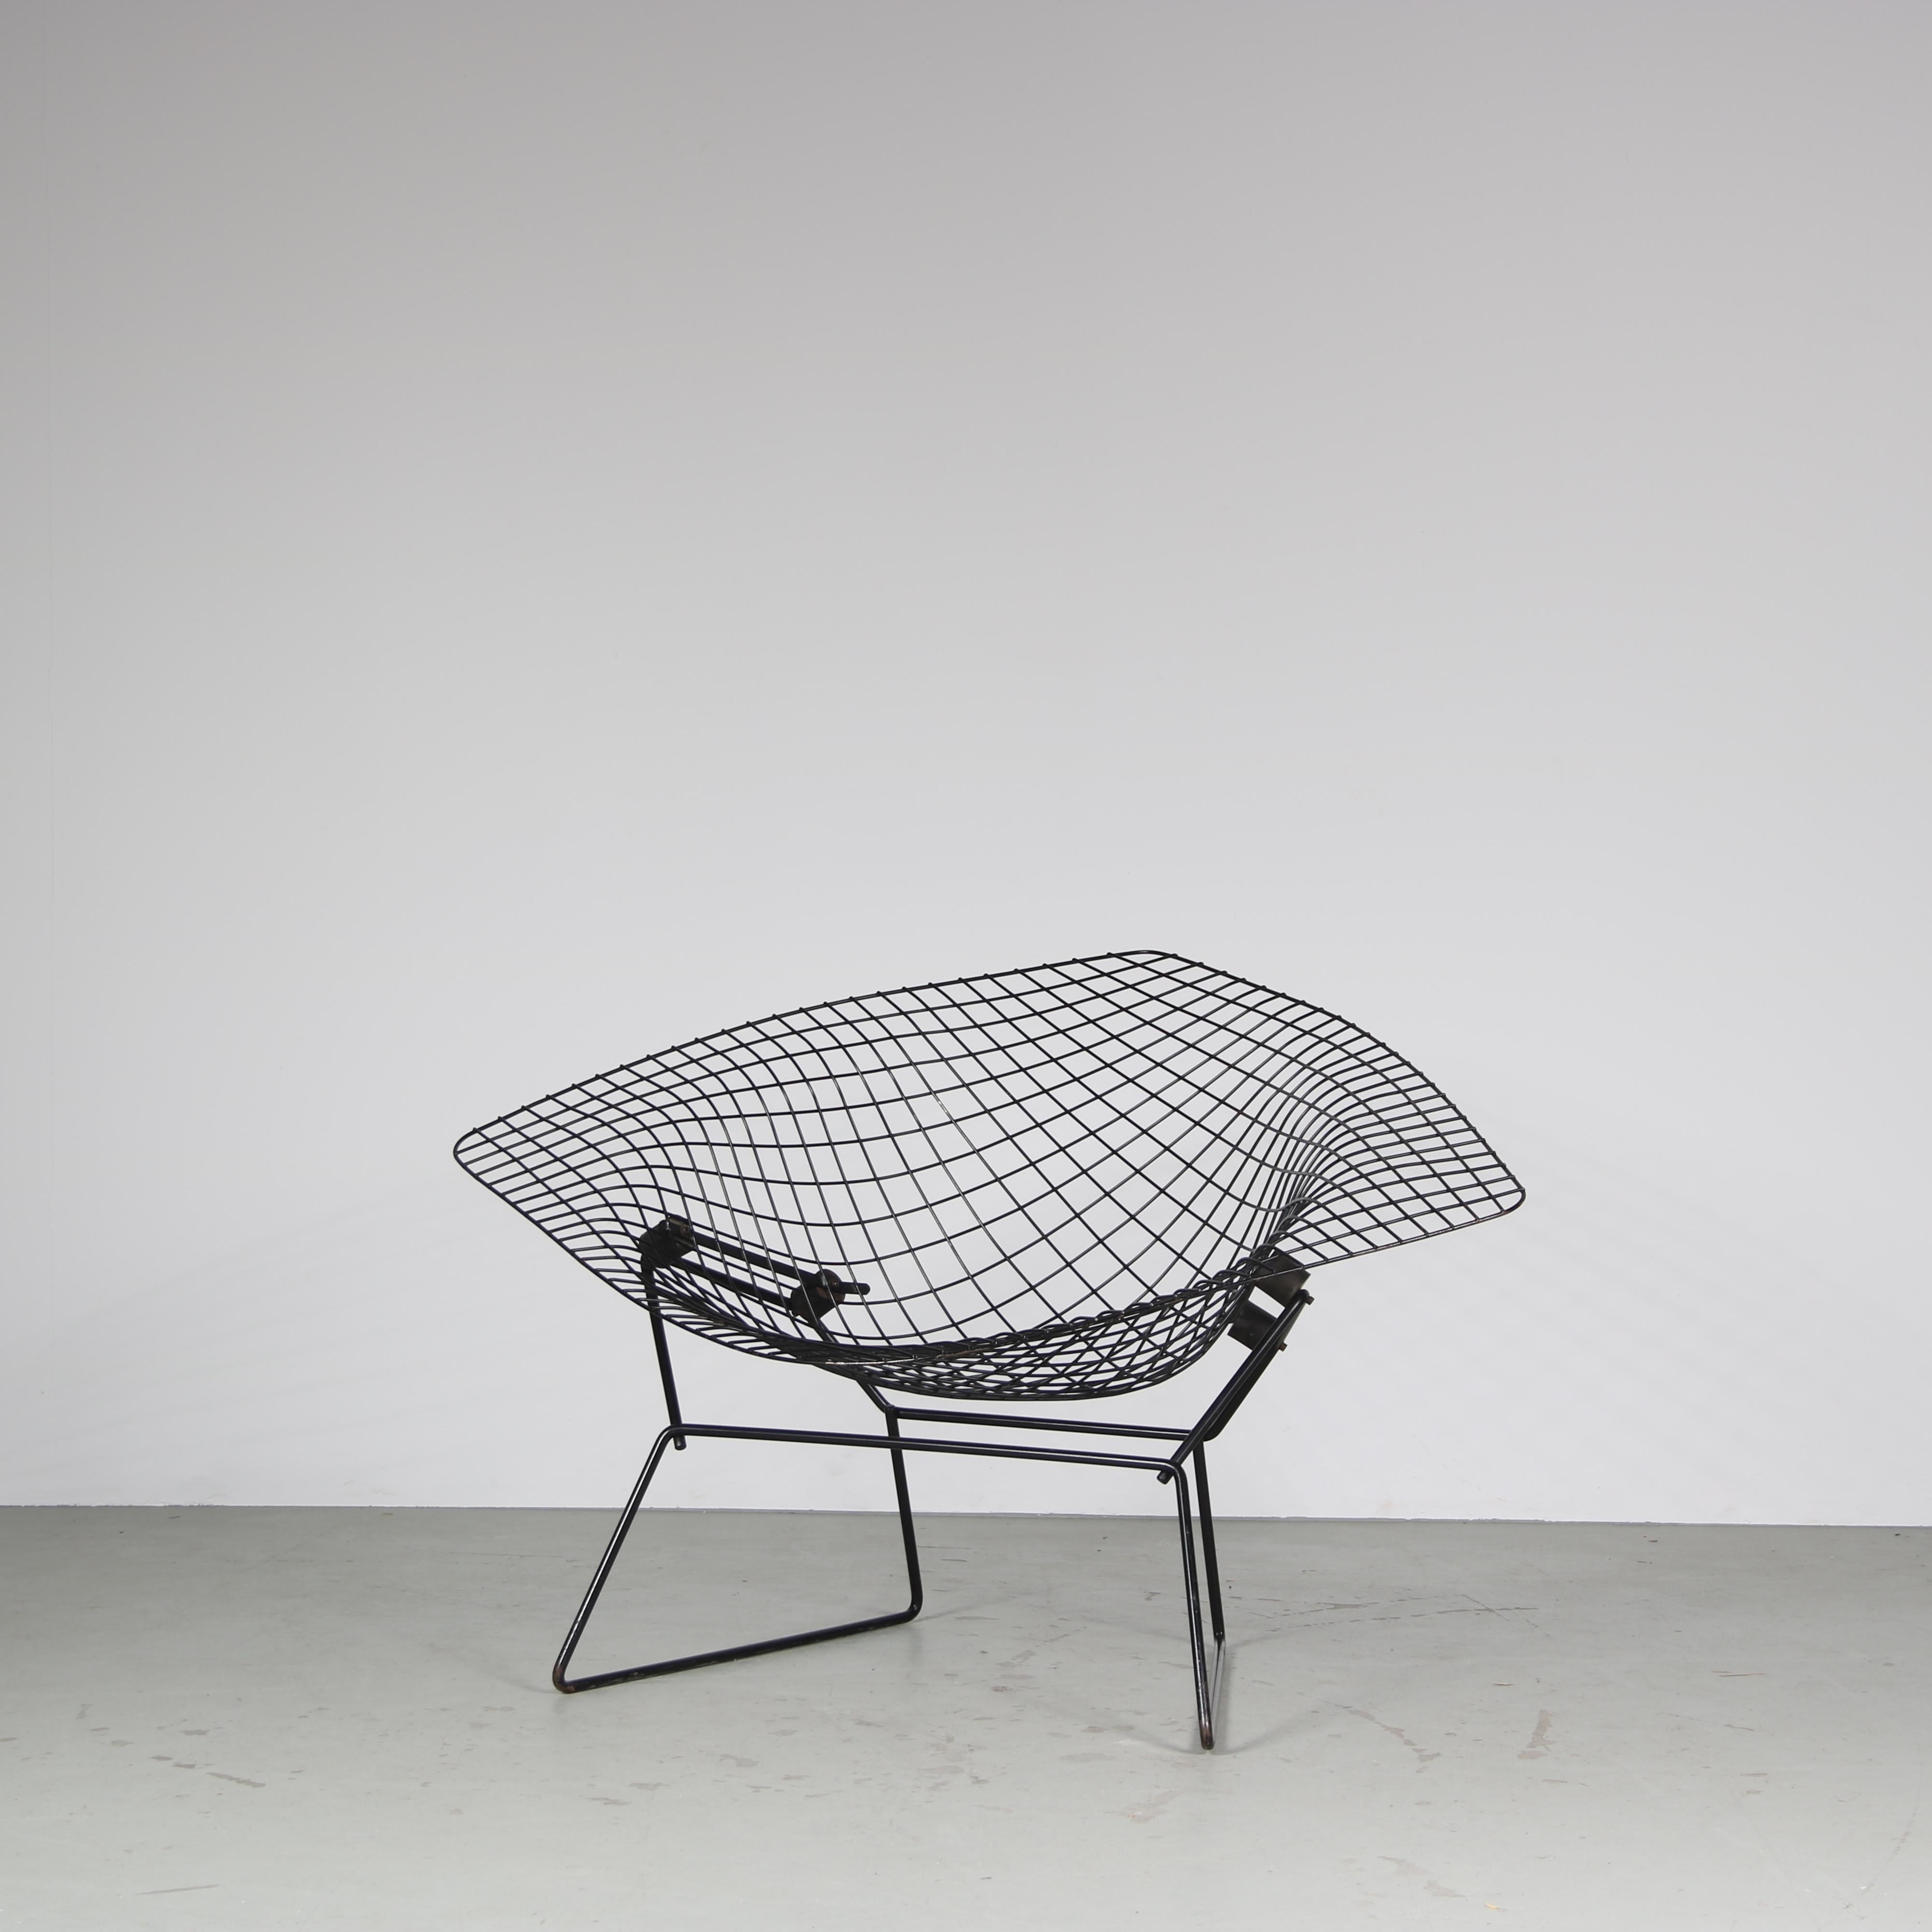 An impressive lounge chair designed by Harry Bertoia, manufactured by Knoll International in the USA around 1970.

This iconic piece is named the “Big Diamond”, after the bent diamond shape of the seat. Made of black lacquered wire metal on a